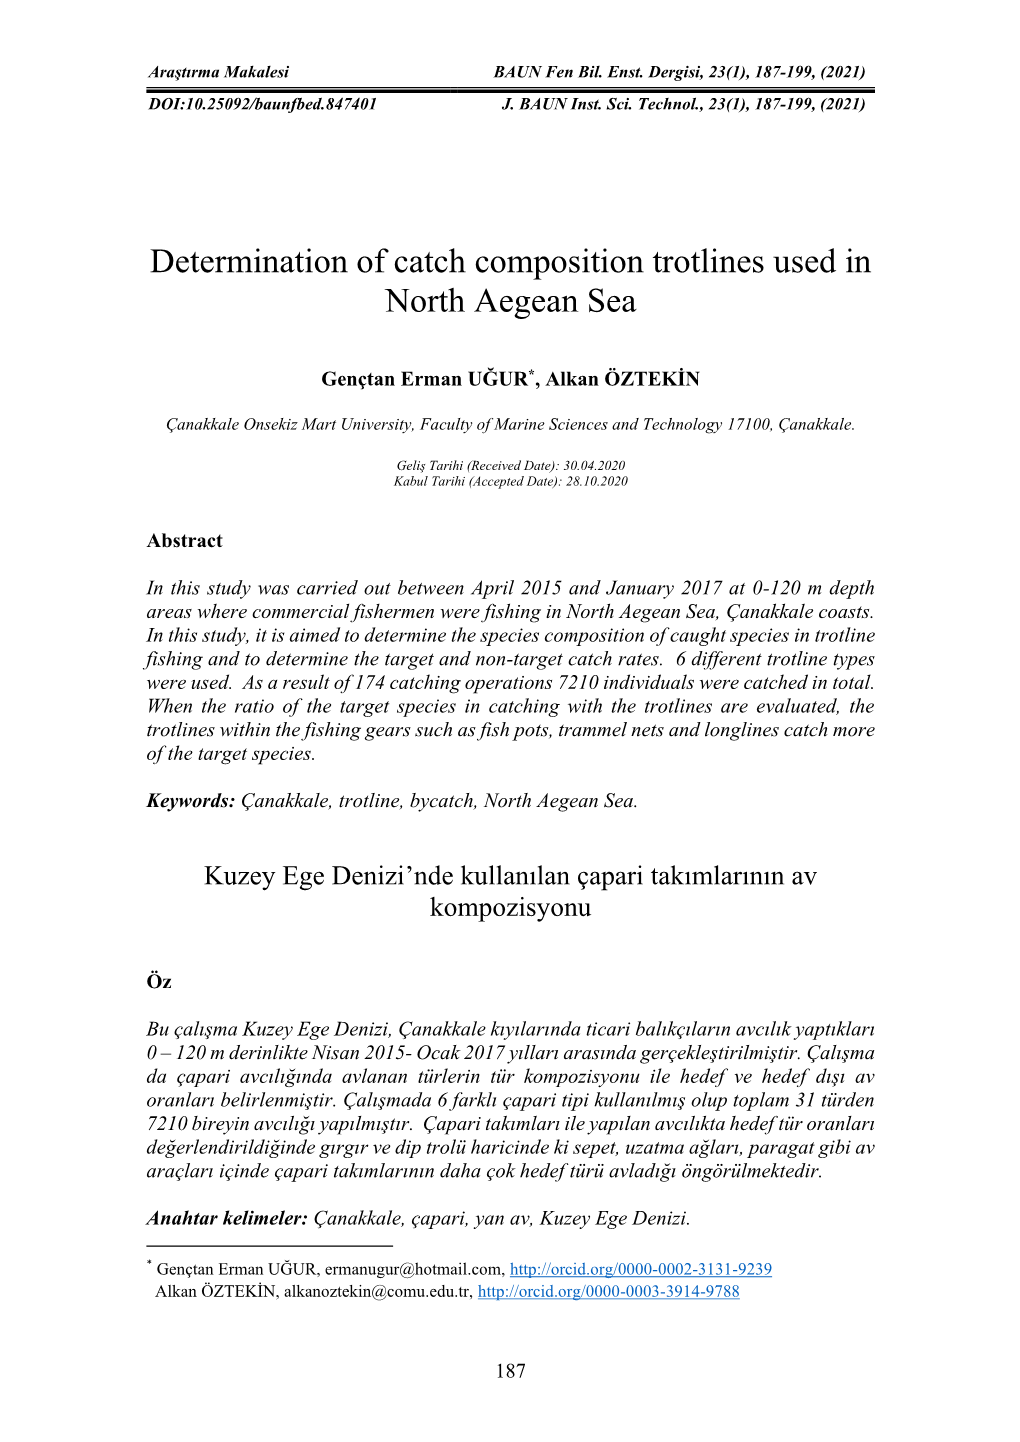 Determination of Catch Composition Trotlines Used in North Aegean Sea